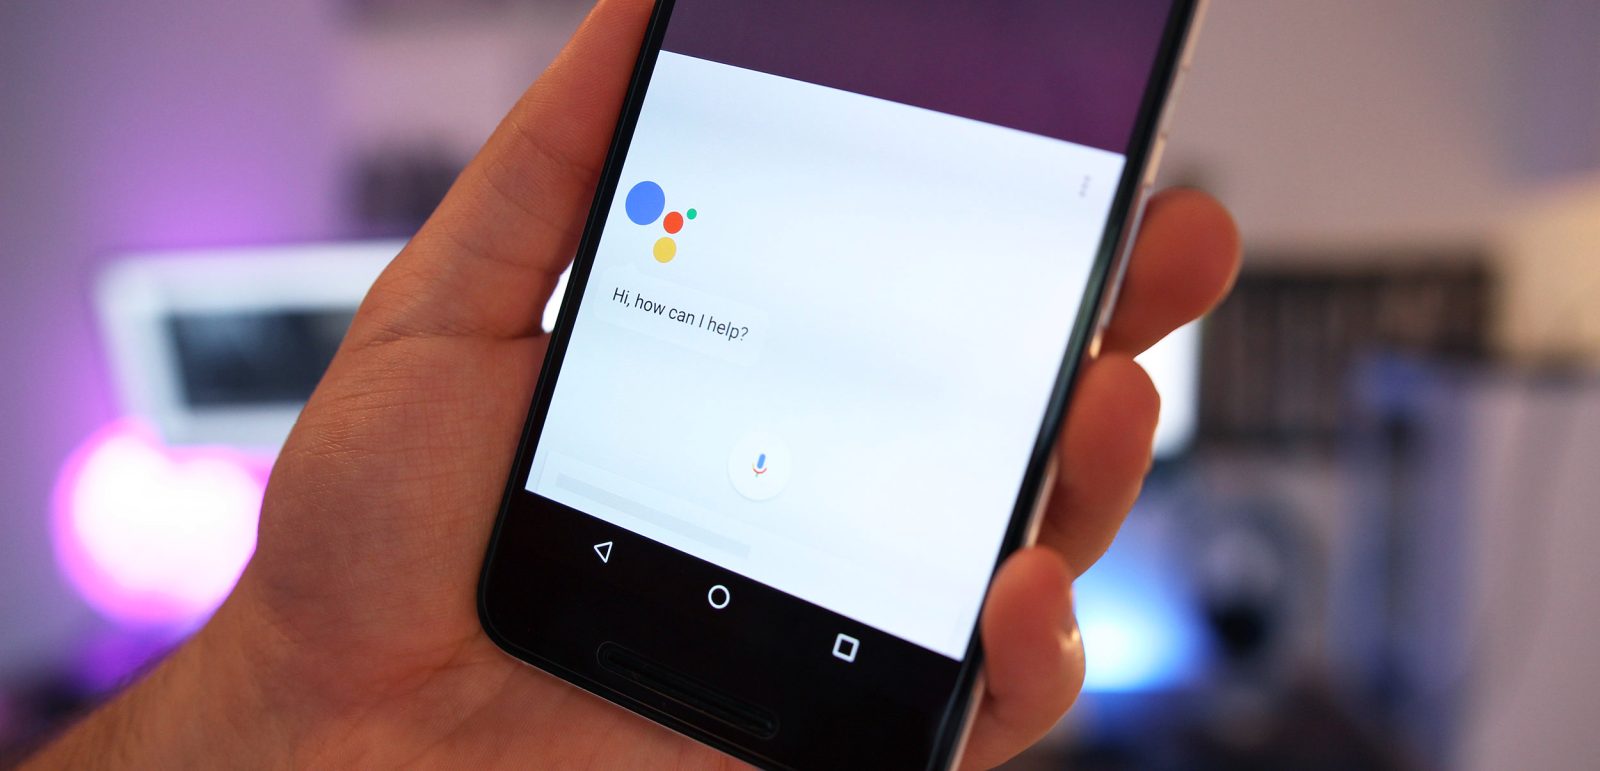 "Hey Google" Wakeup Command is now available for some Android Devices 6